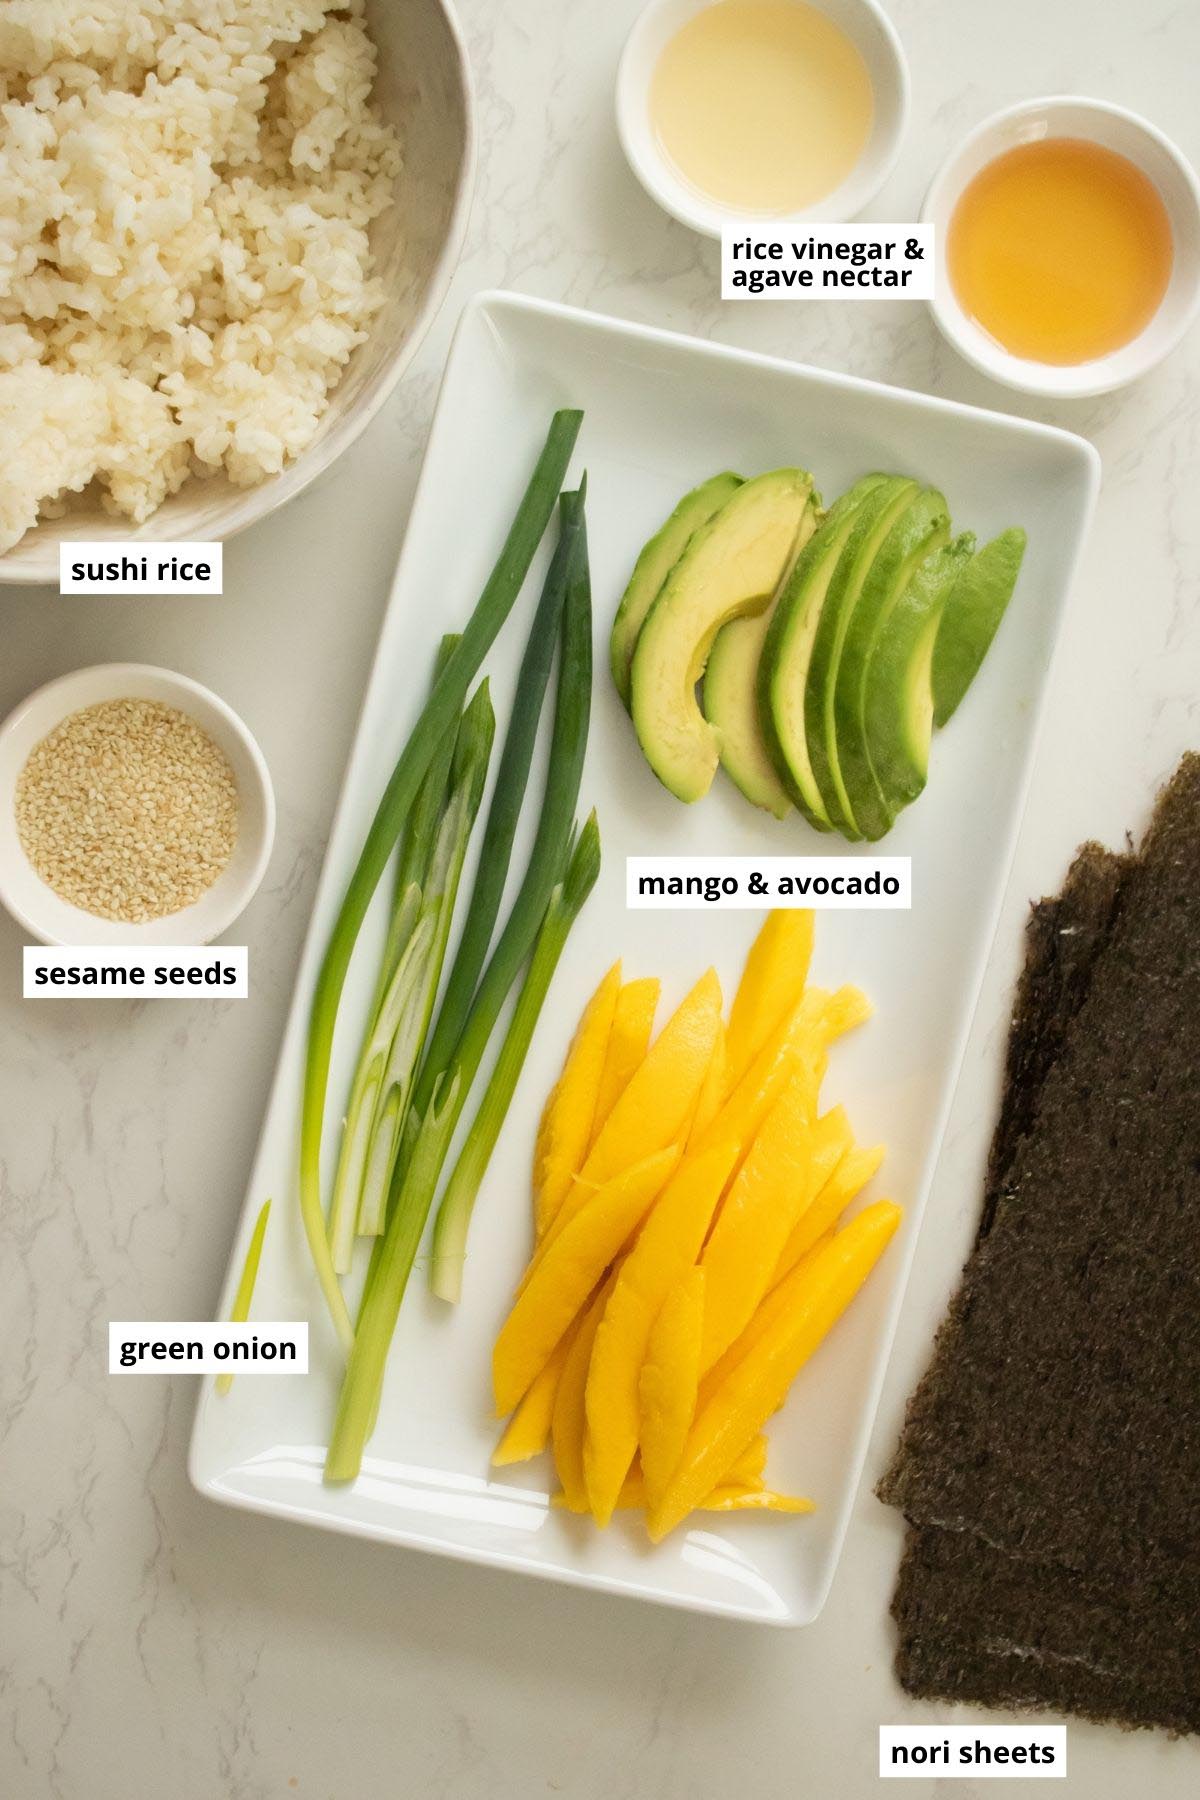 mango, avocado, green onion, and other sushi ingredients on a white table